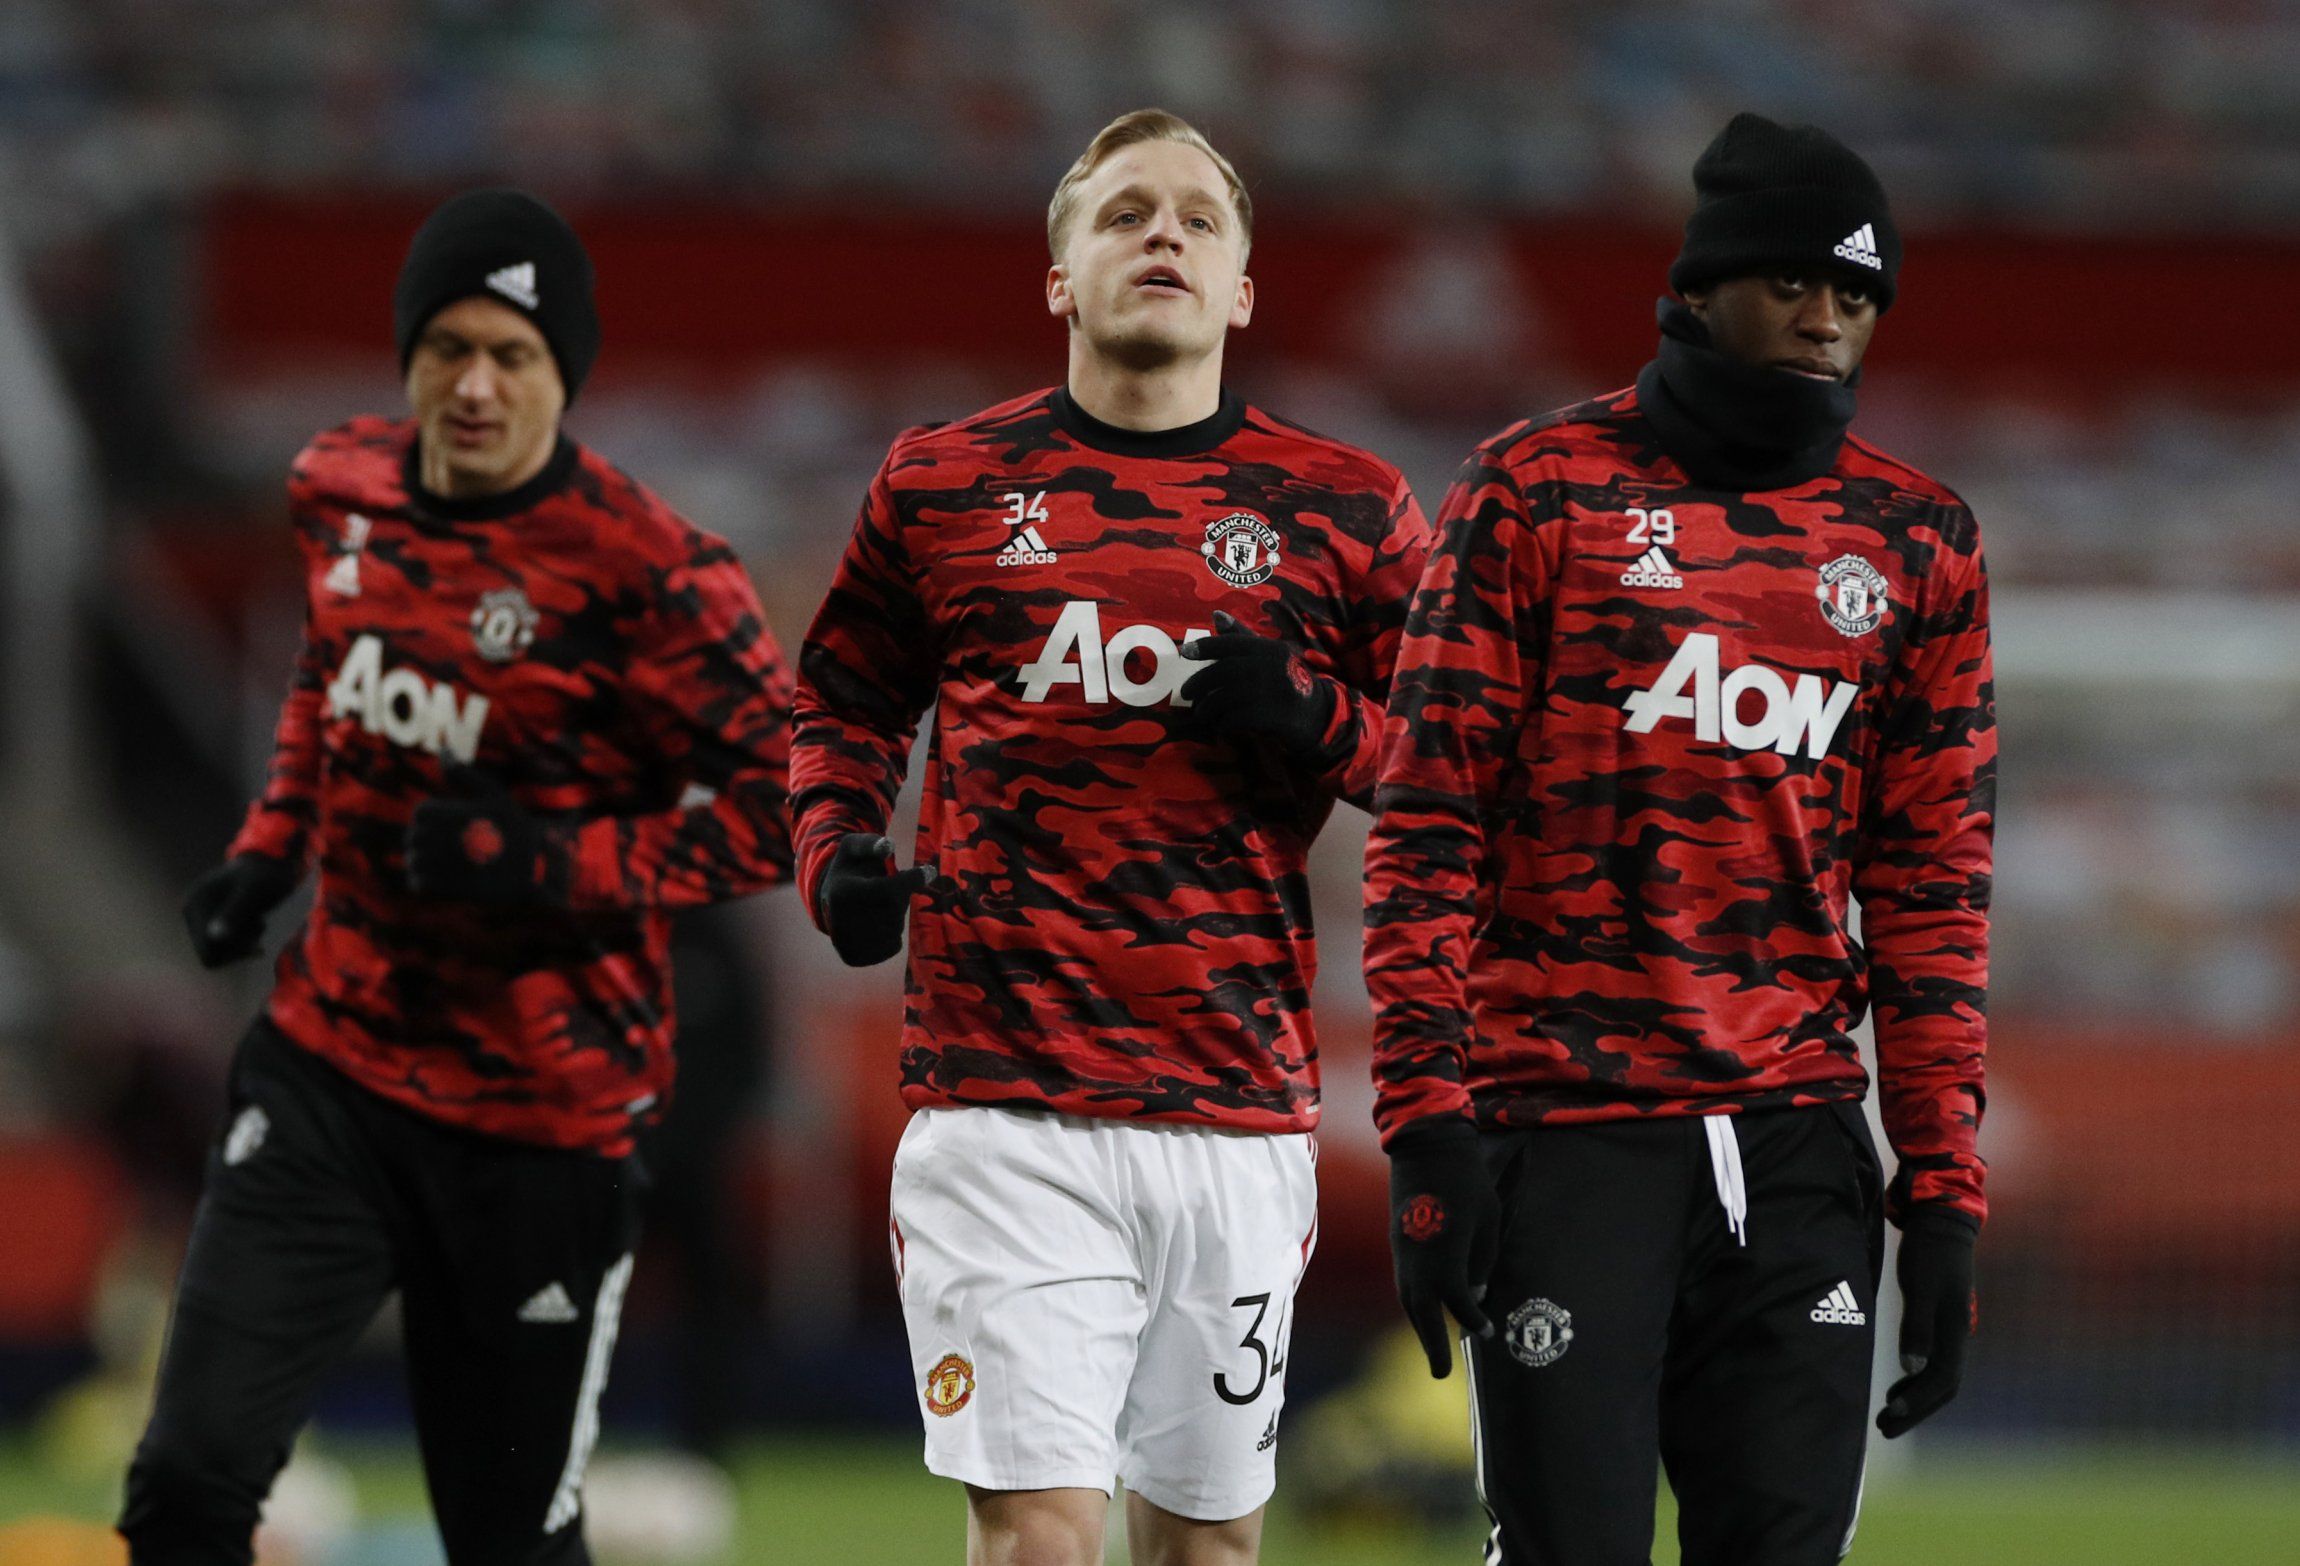 manchester united midfielder donny van de beek during warm up against west ham in the fa cup fifth round